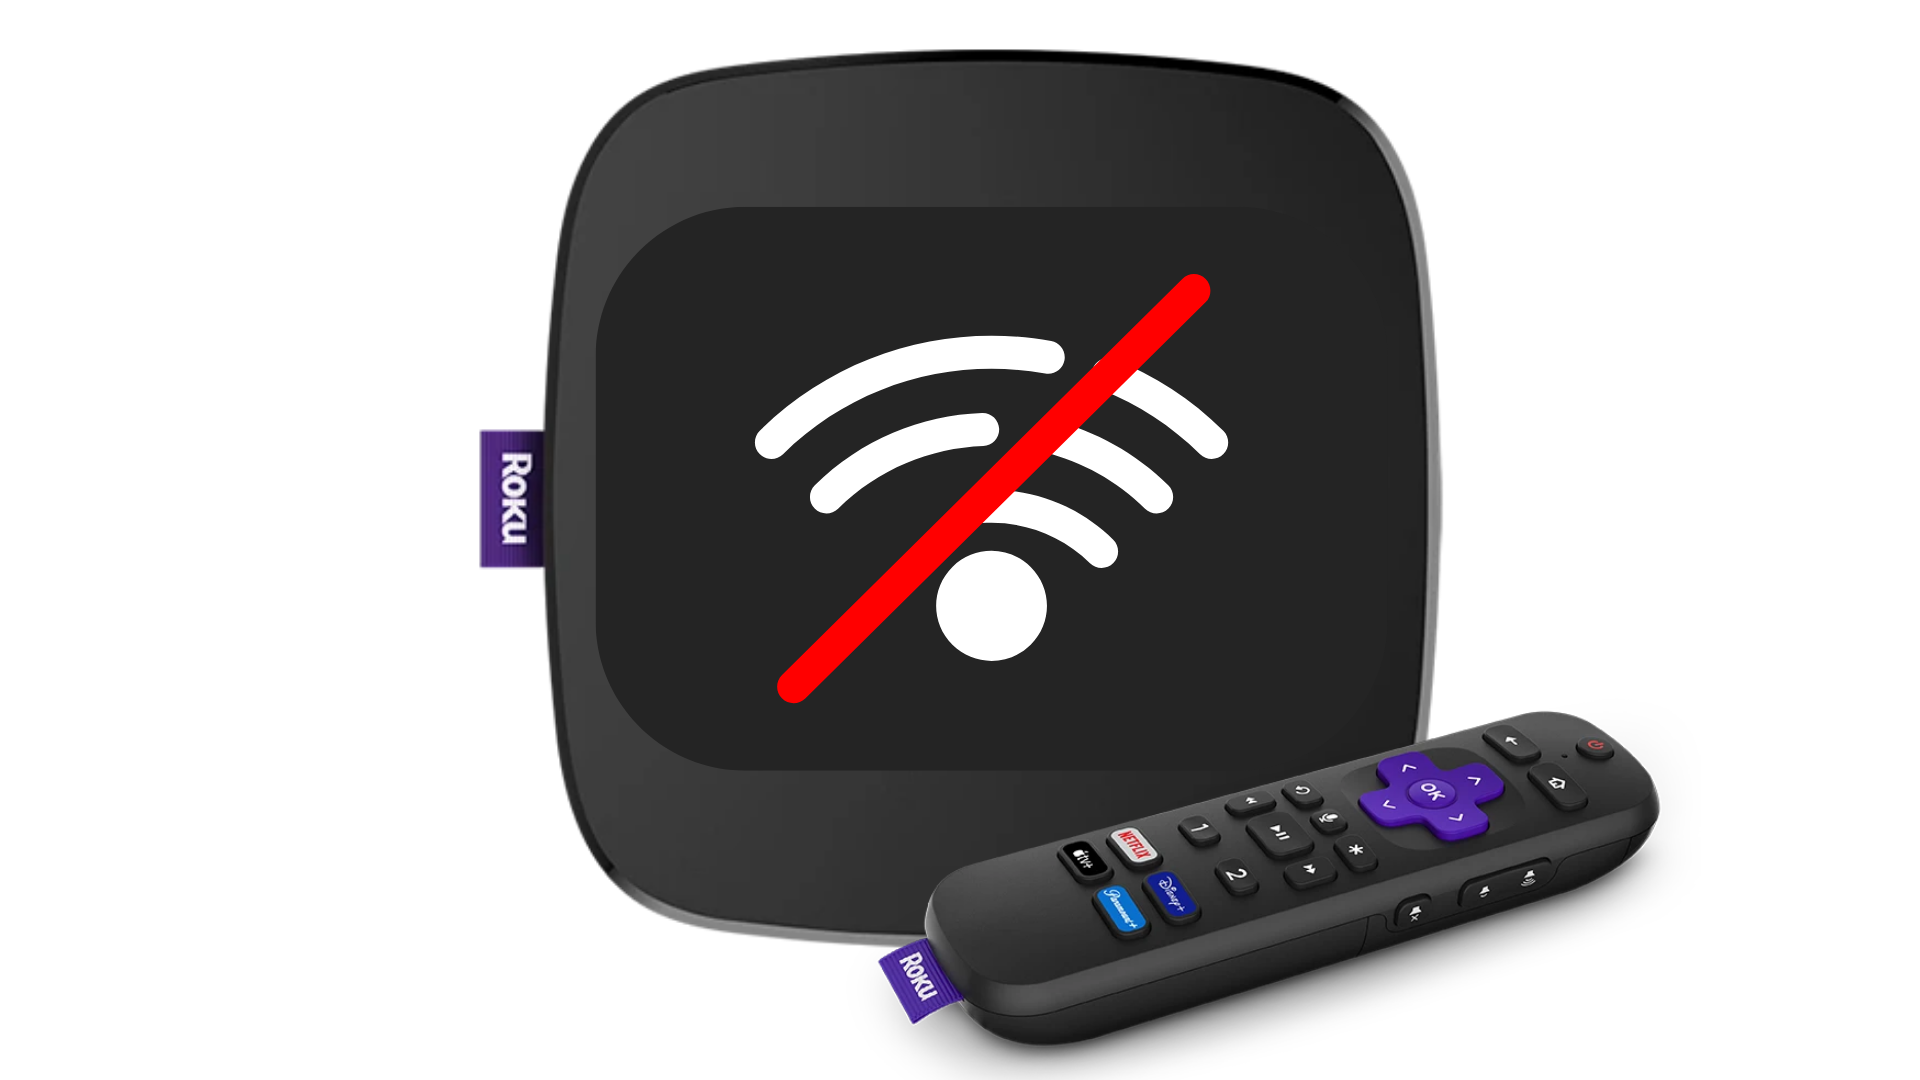 roku won't connect to wifi